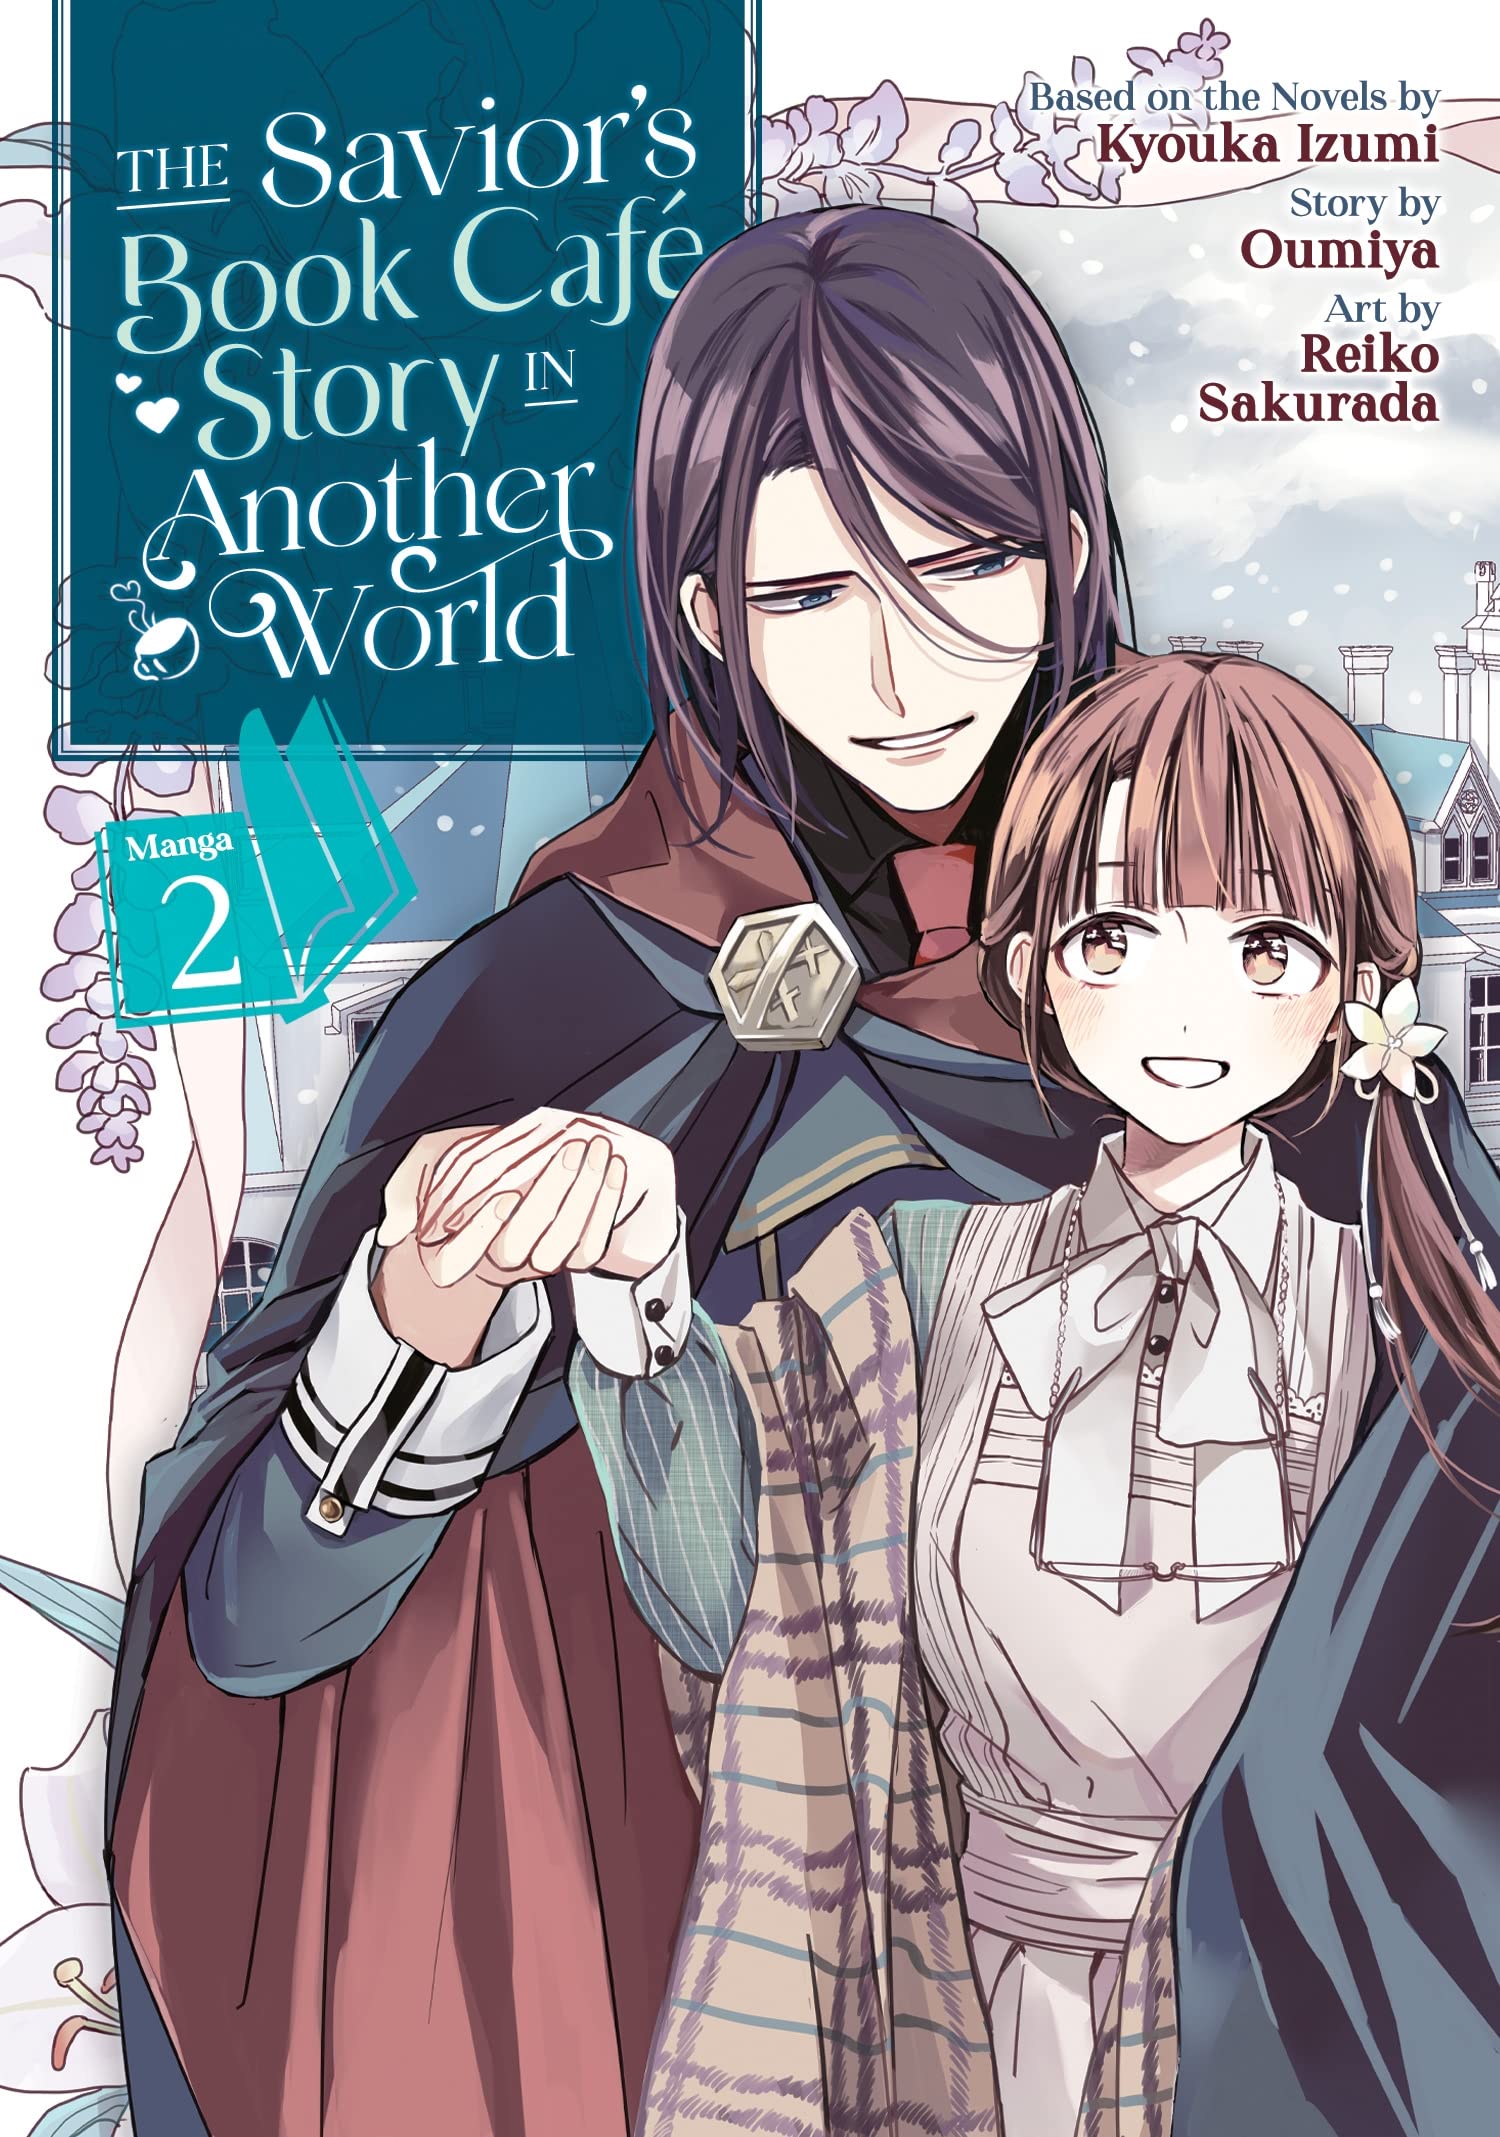 The Savior's Book Café Story in Another World (Manga) Vol. 02